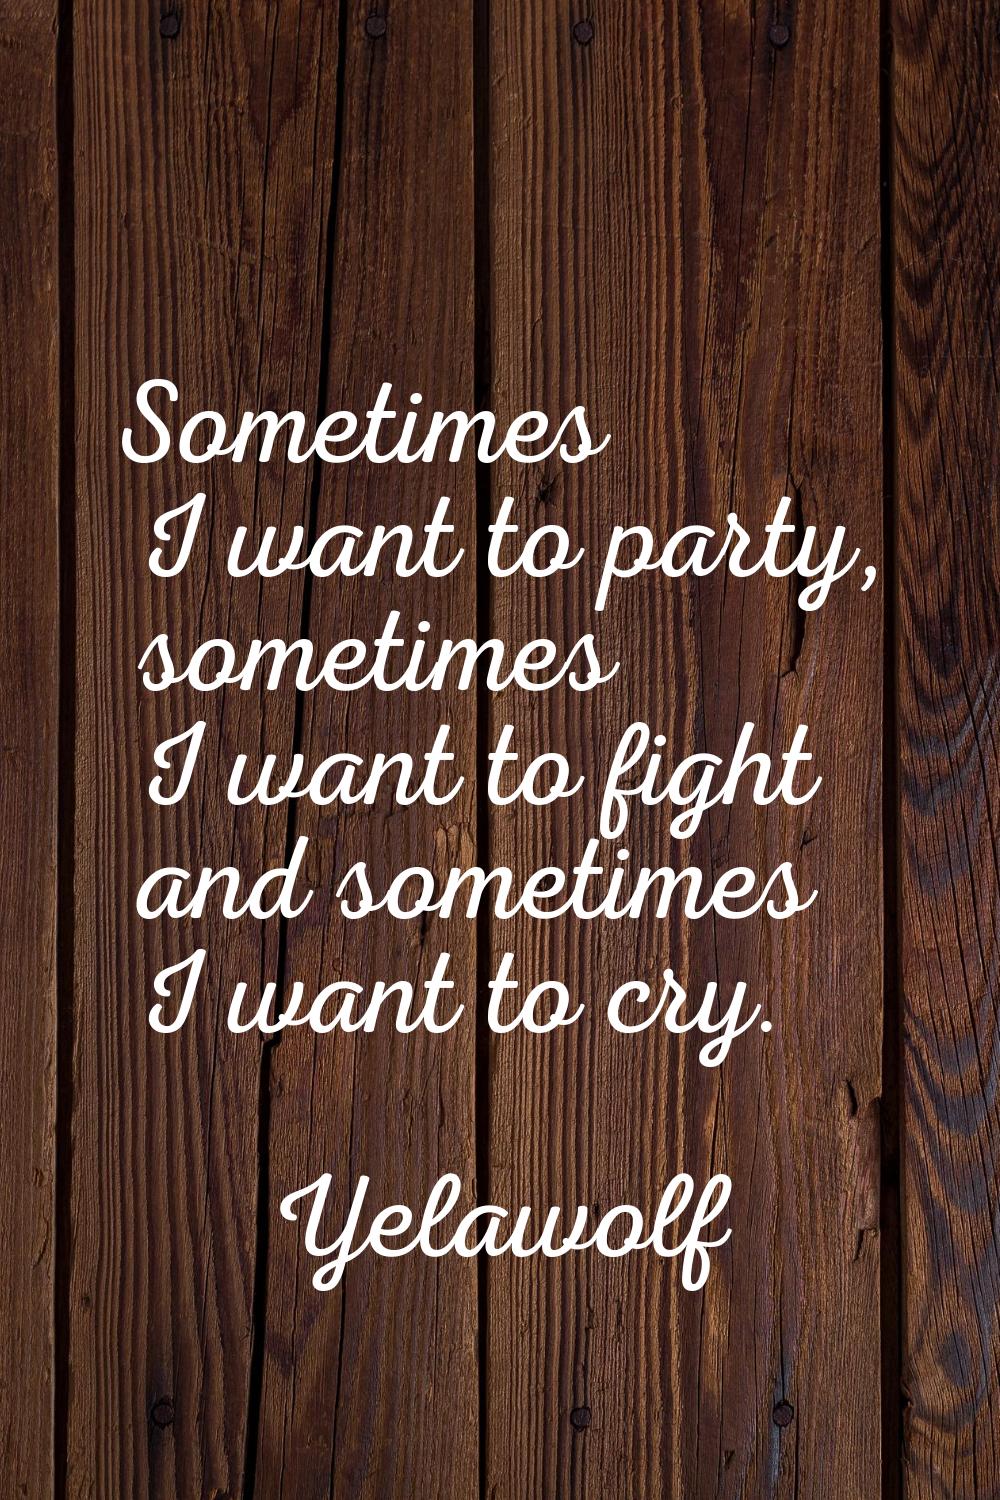 Sometimes I want to party, sometimes I want to fight and sometimes I want to cry.